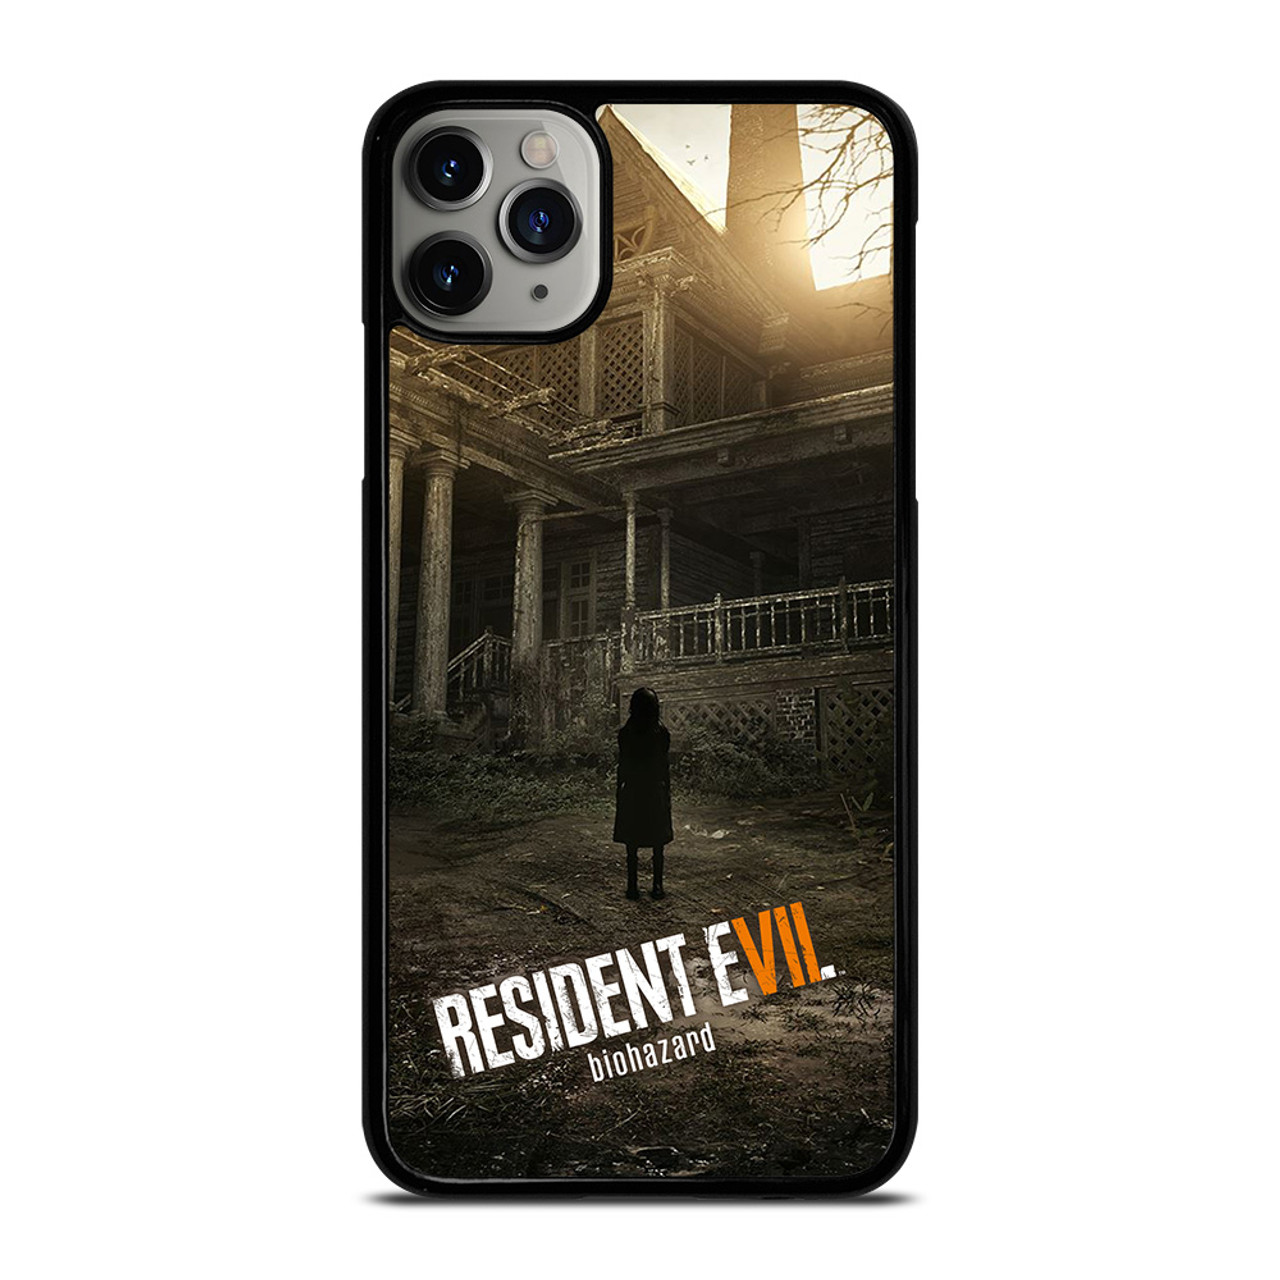 RESIDENT EVIL 7 BIOHAZARD iPhone 11 Pro Max Case Cover